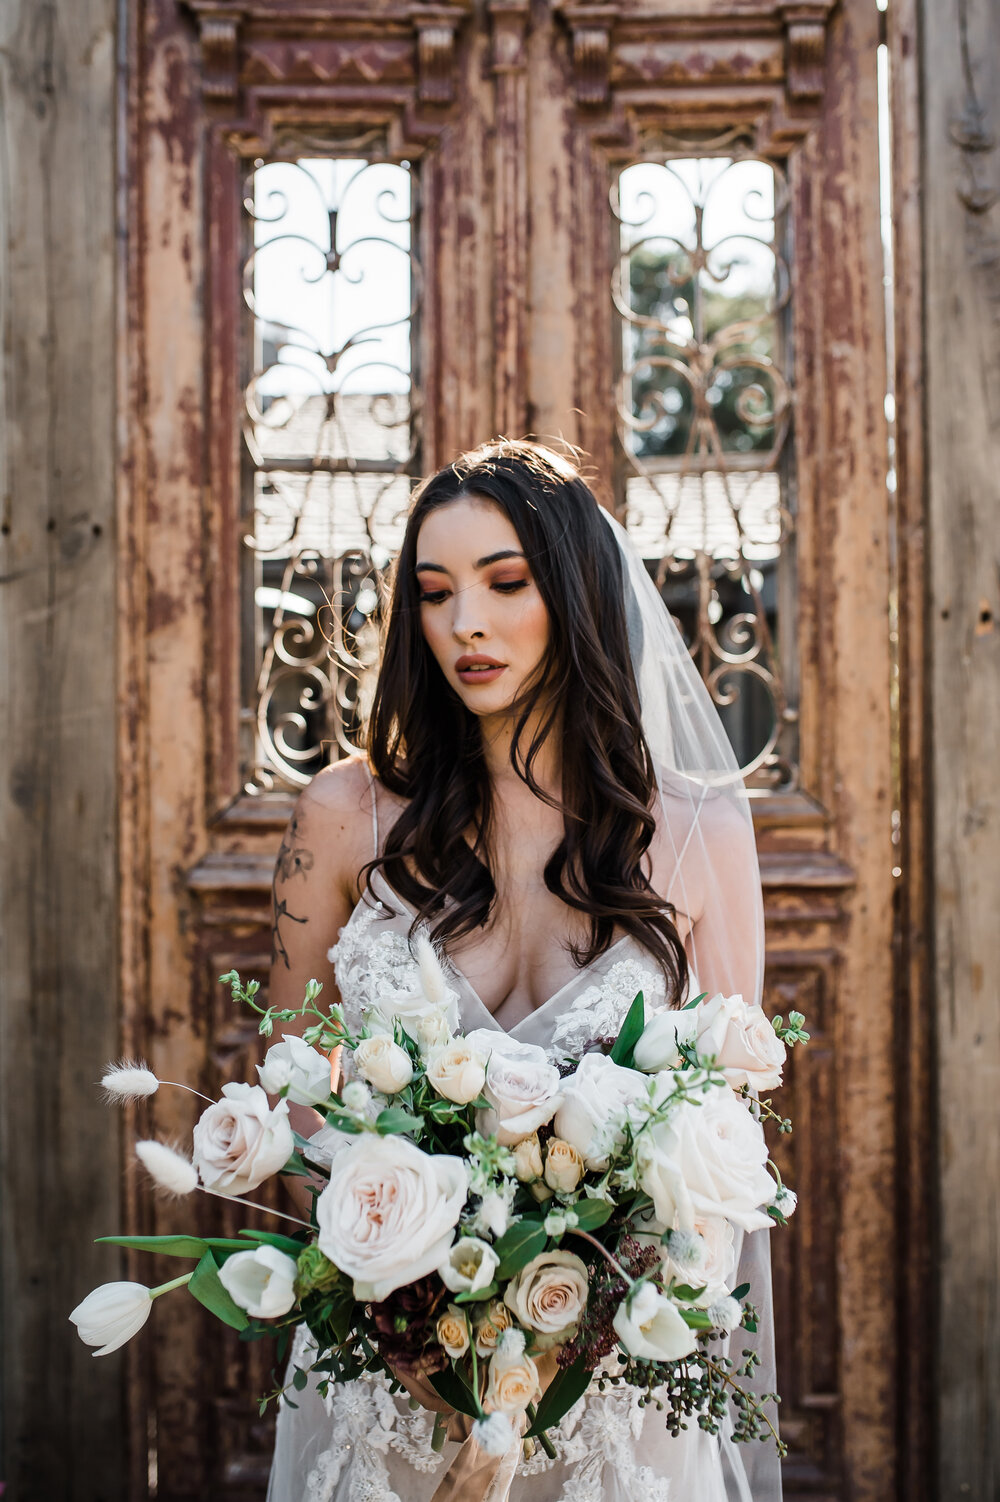 www.santabarbarawedding.com | The Tavern at Zaca Creek | Events by Fran | Michelle Ramirez Photography | Tangled Lotus | Ever After Bridal | BHLDN | Jackie Romero | Bride and Bouquet